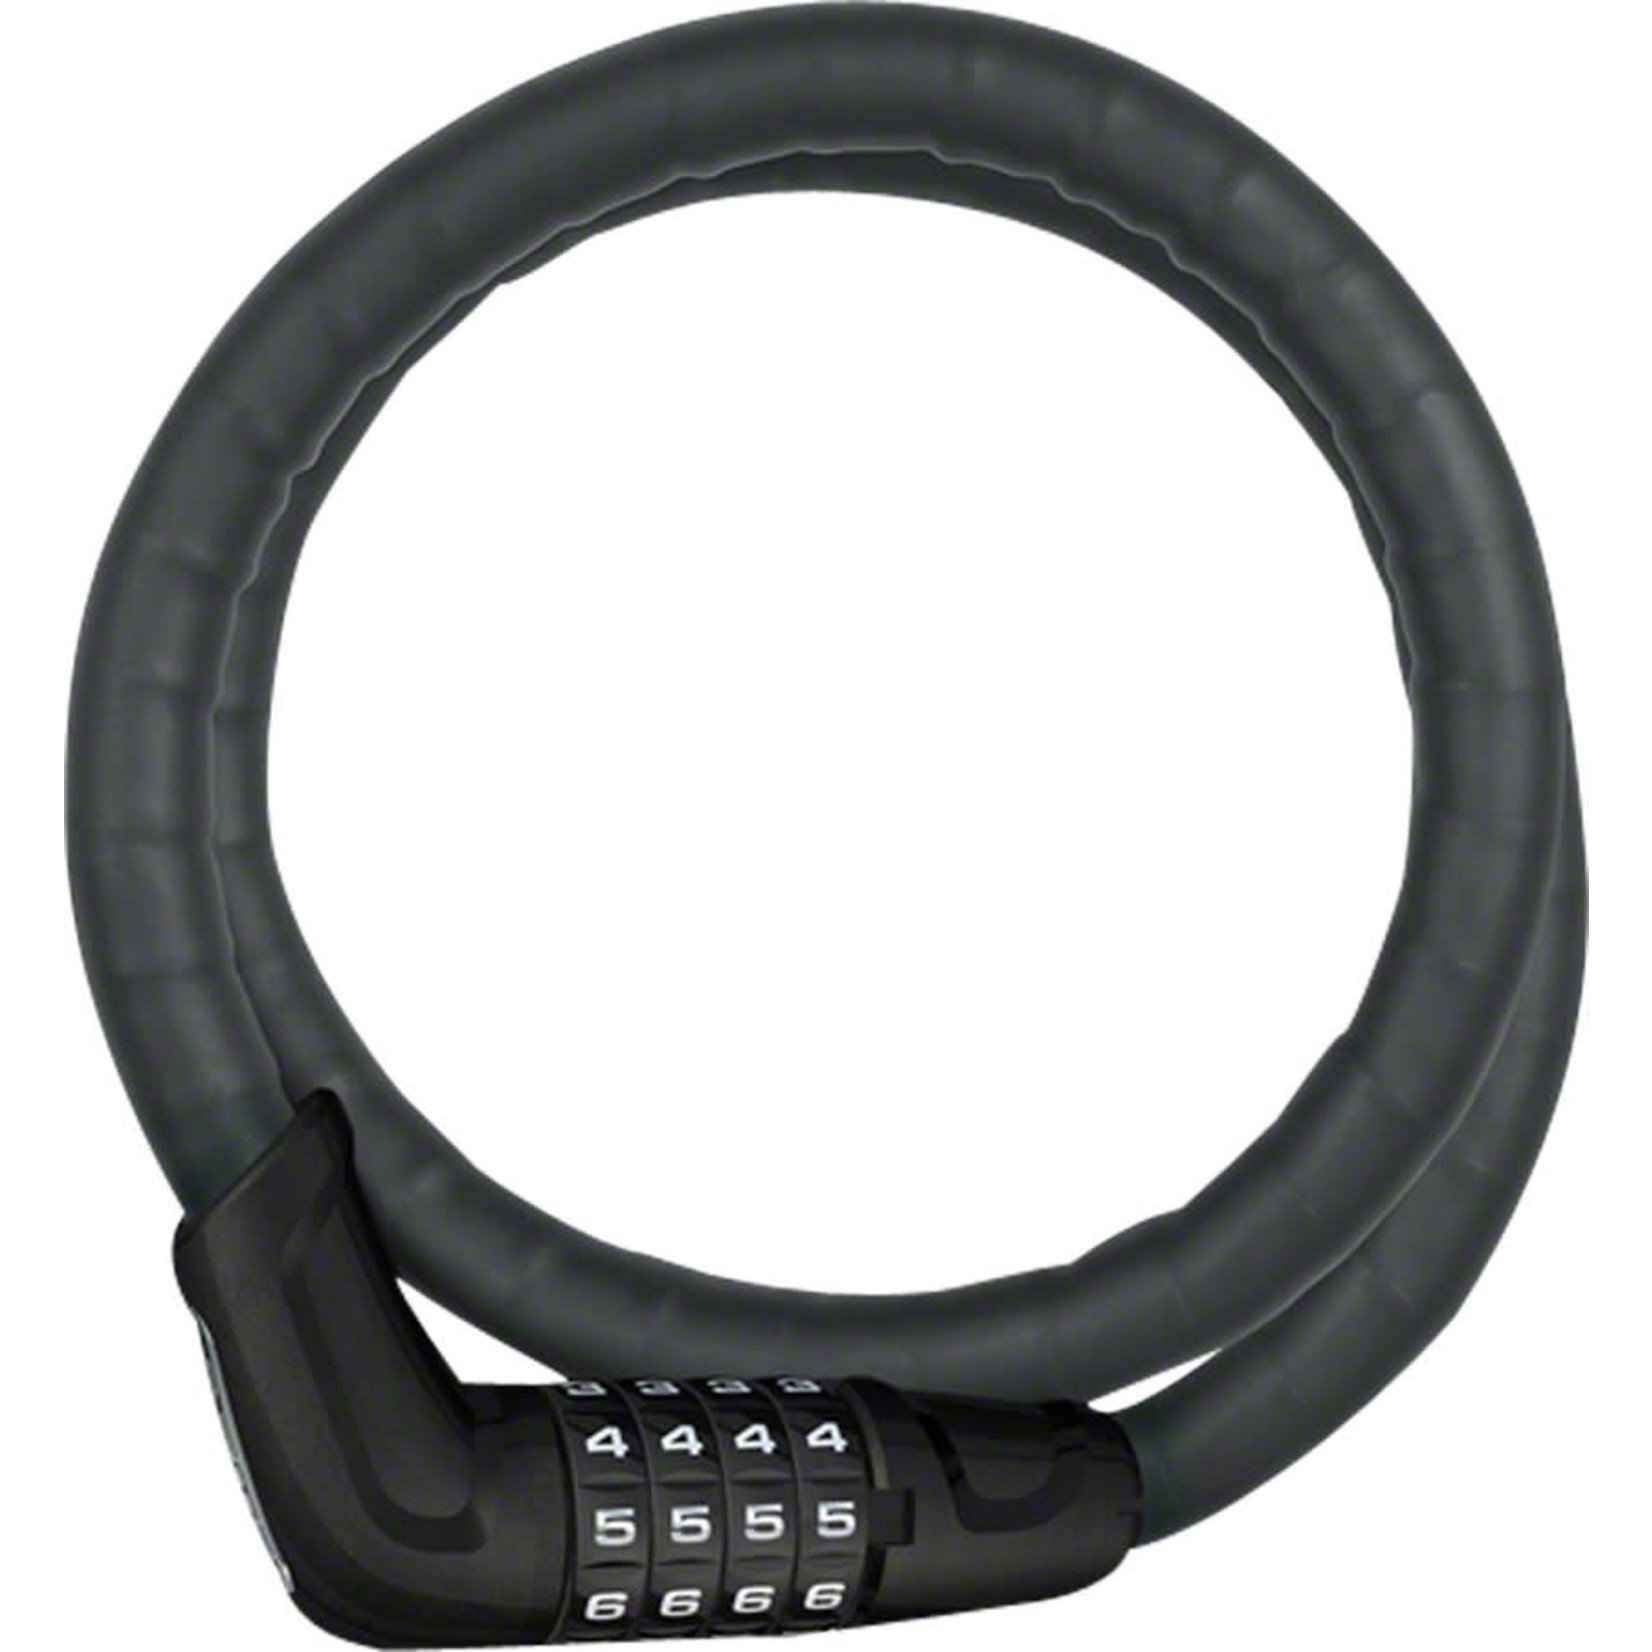 ABUS ABUS Tresorflex 6615 Combination Coiled Cable Lock: 120cm x 15mm With Mount, Black